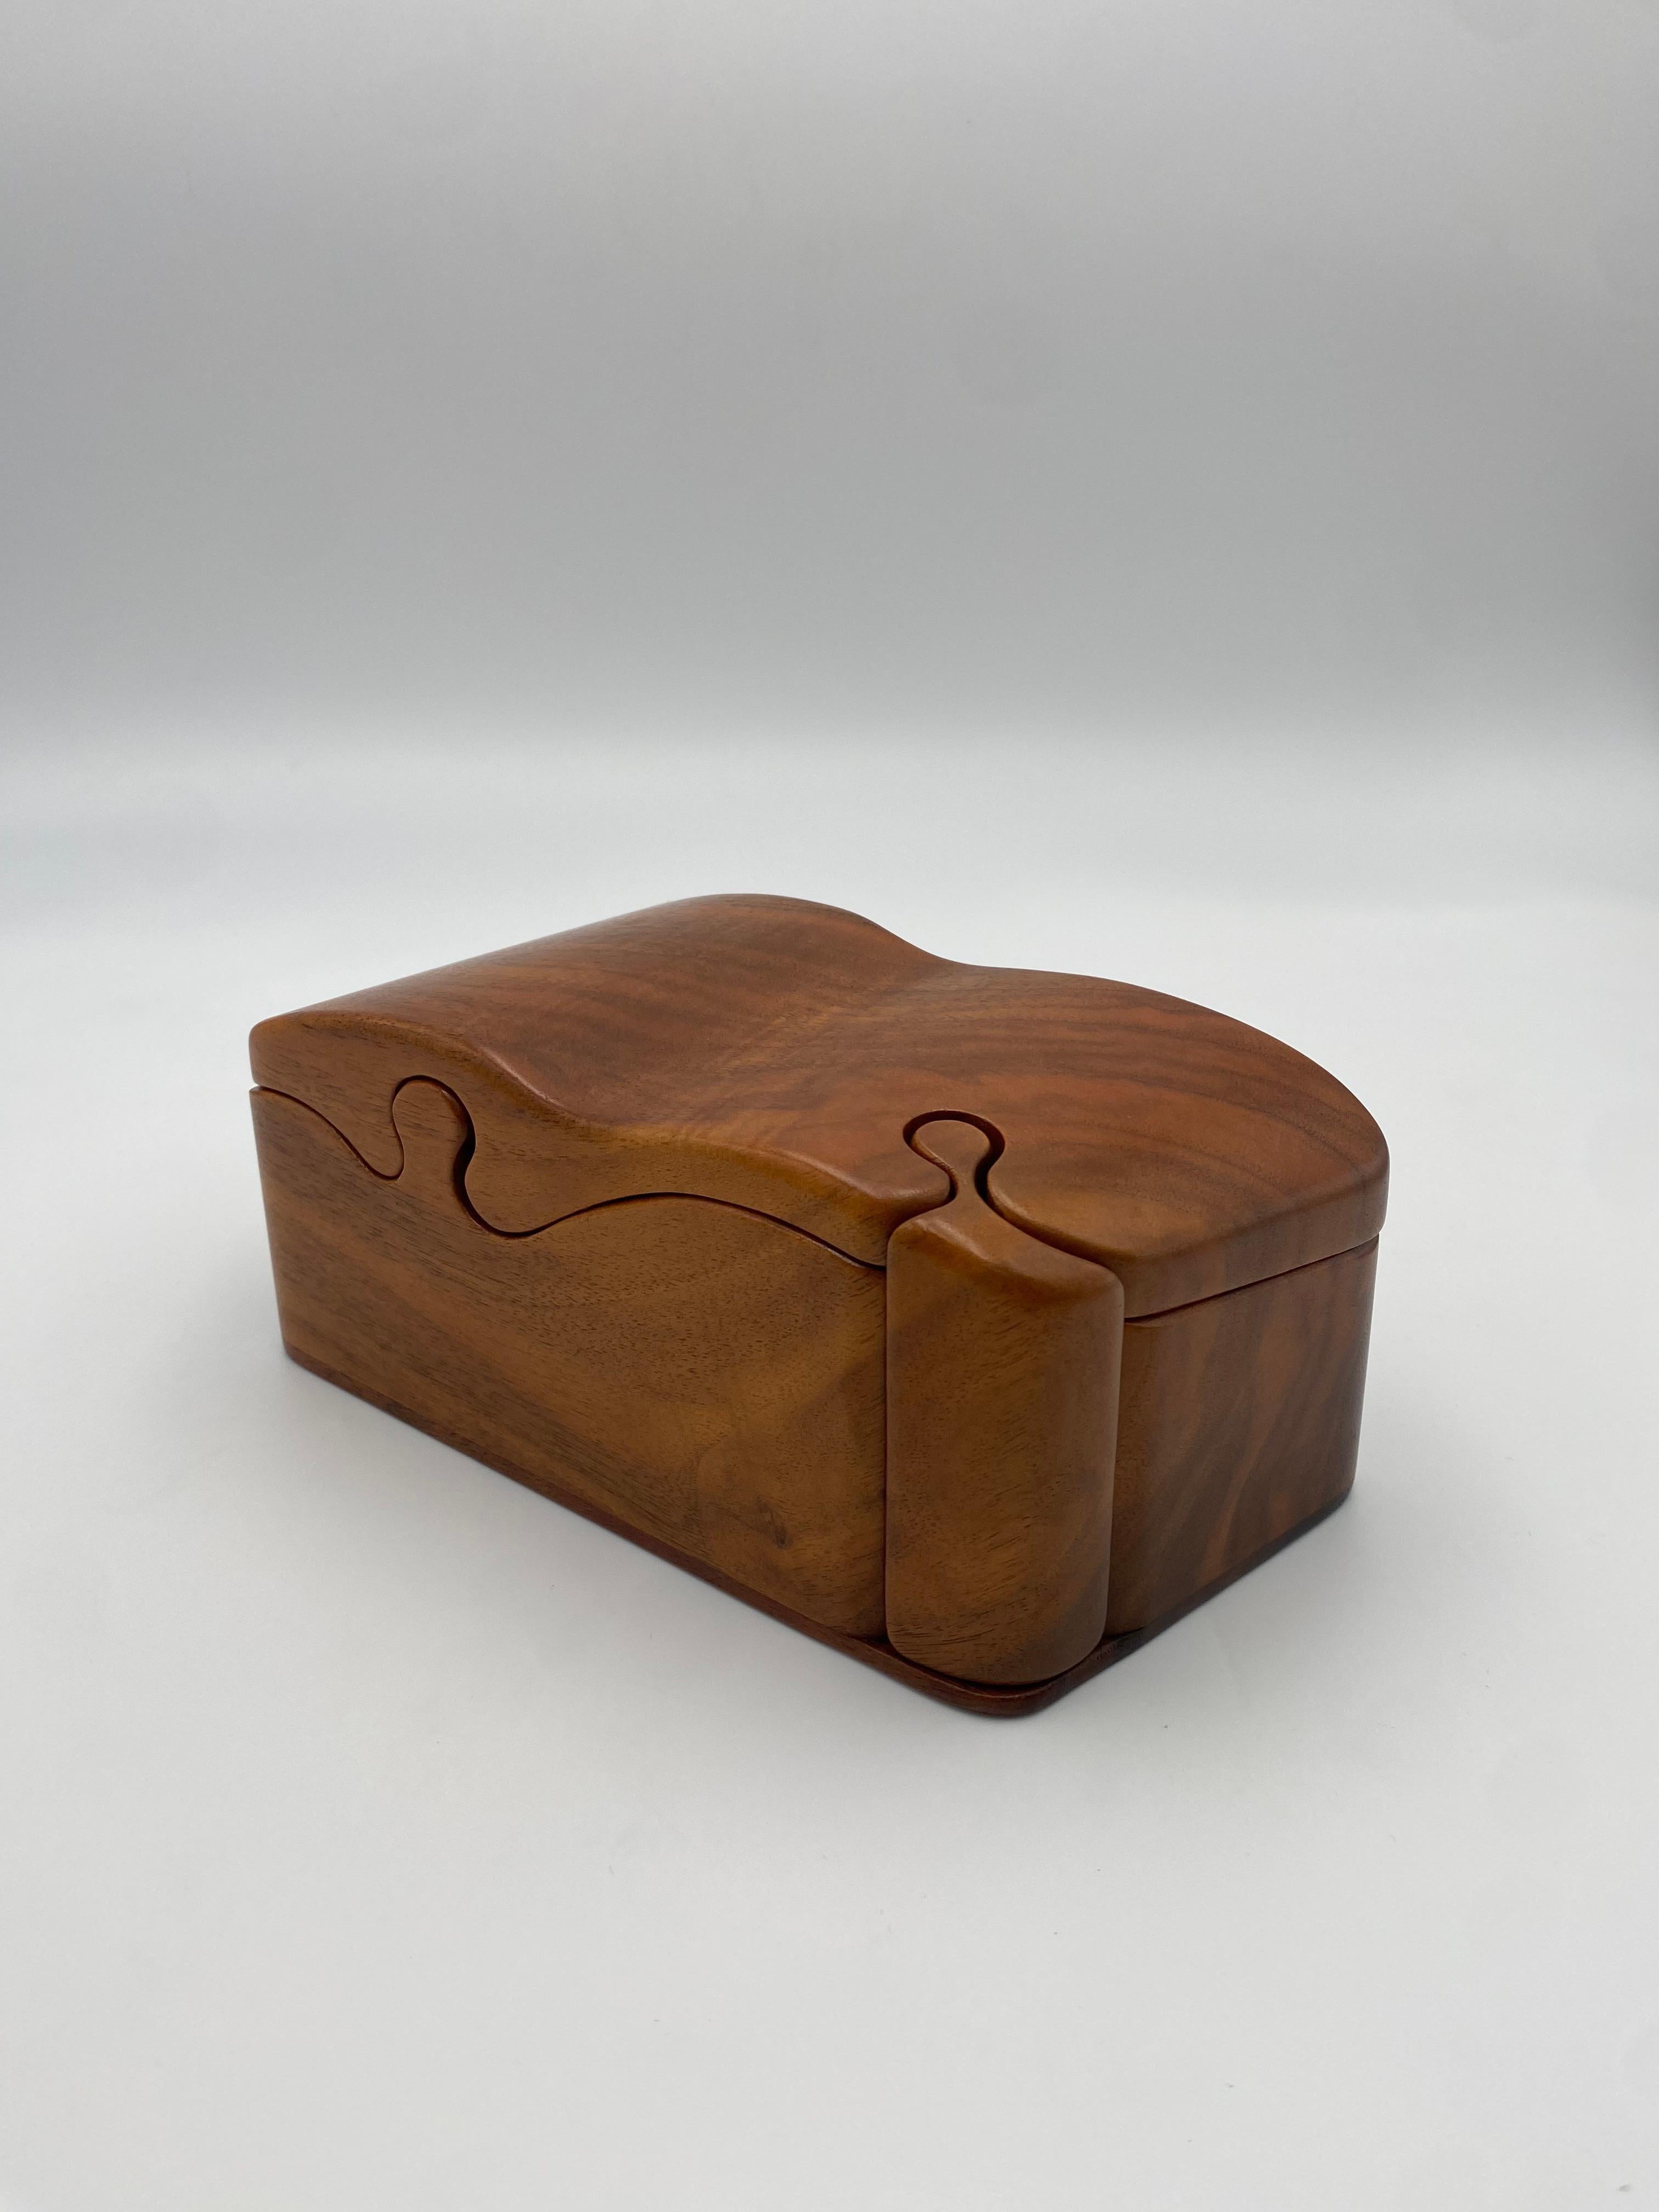 Large Fred and Marilyn Buss Trinket Puzzle Box, 1980s made of english walnut and koawood.